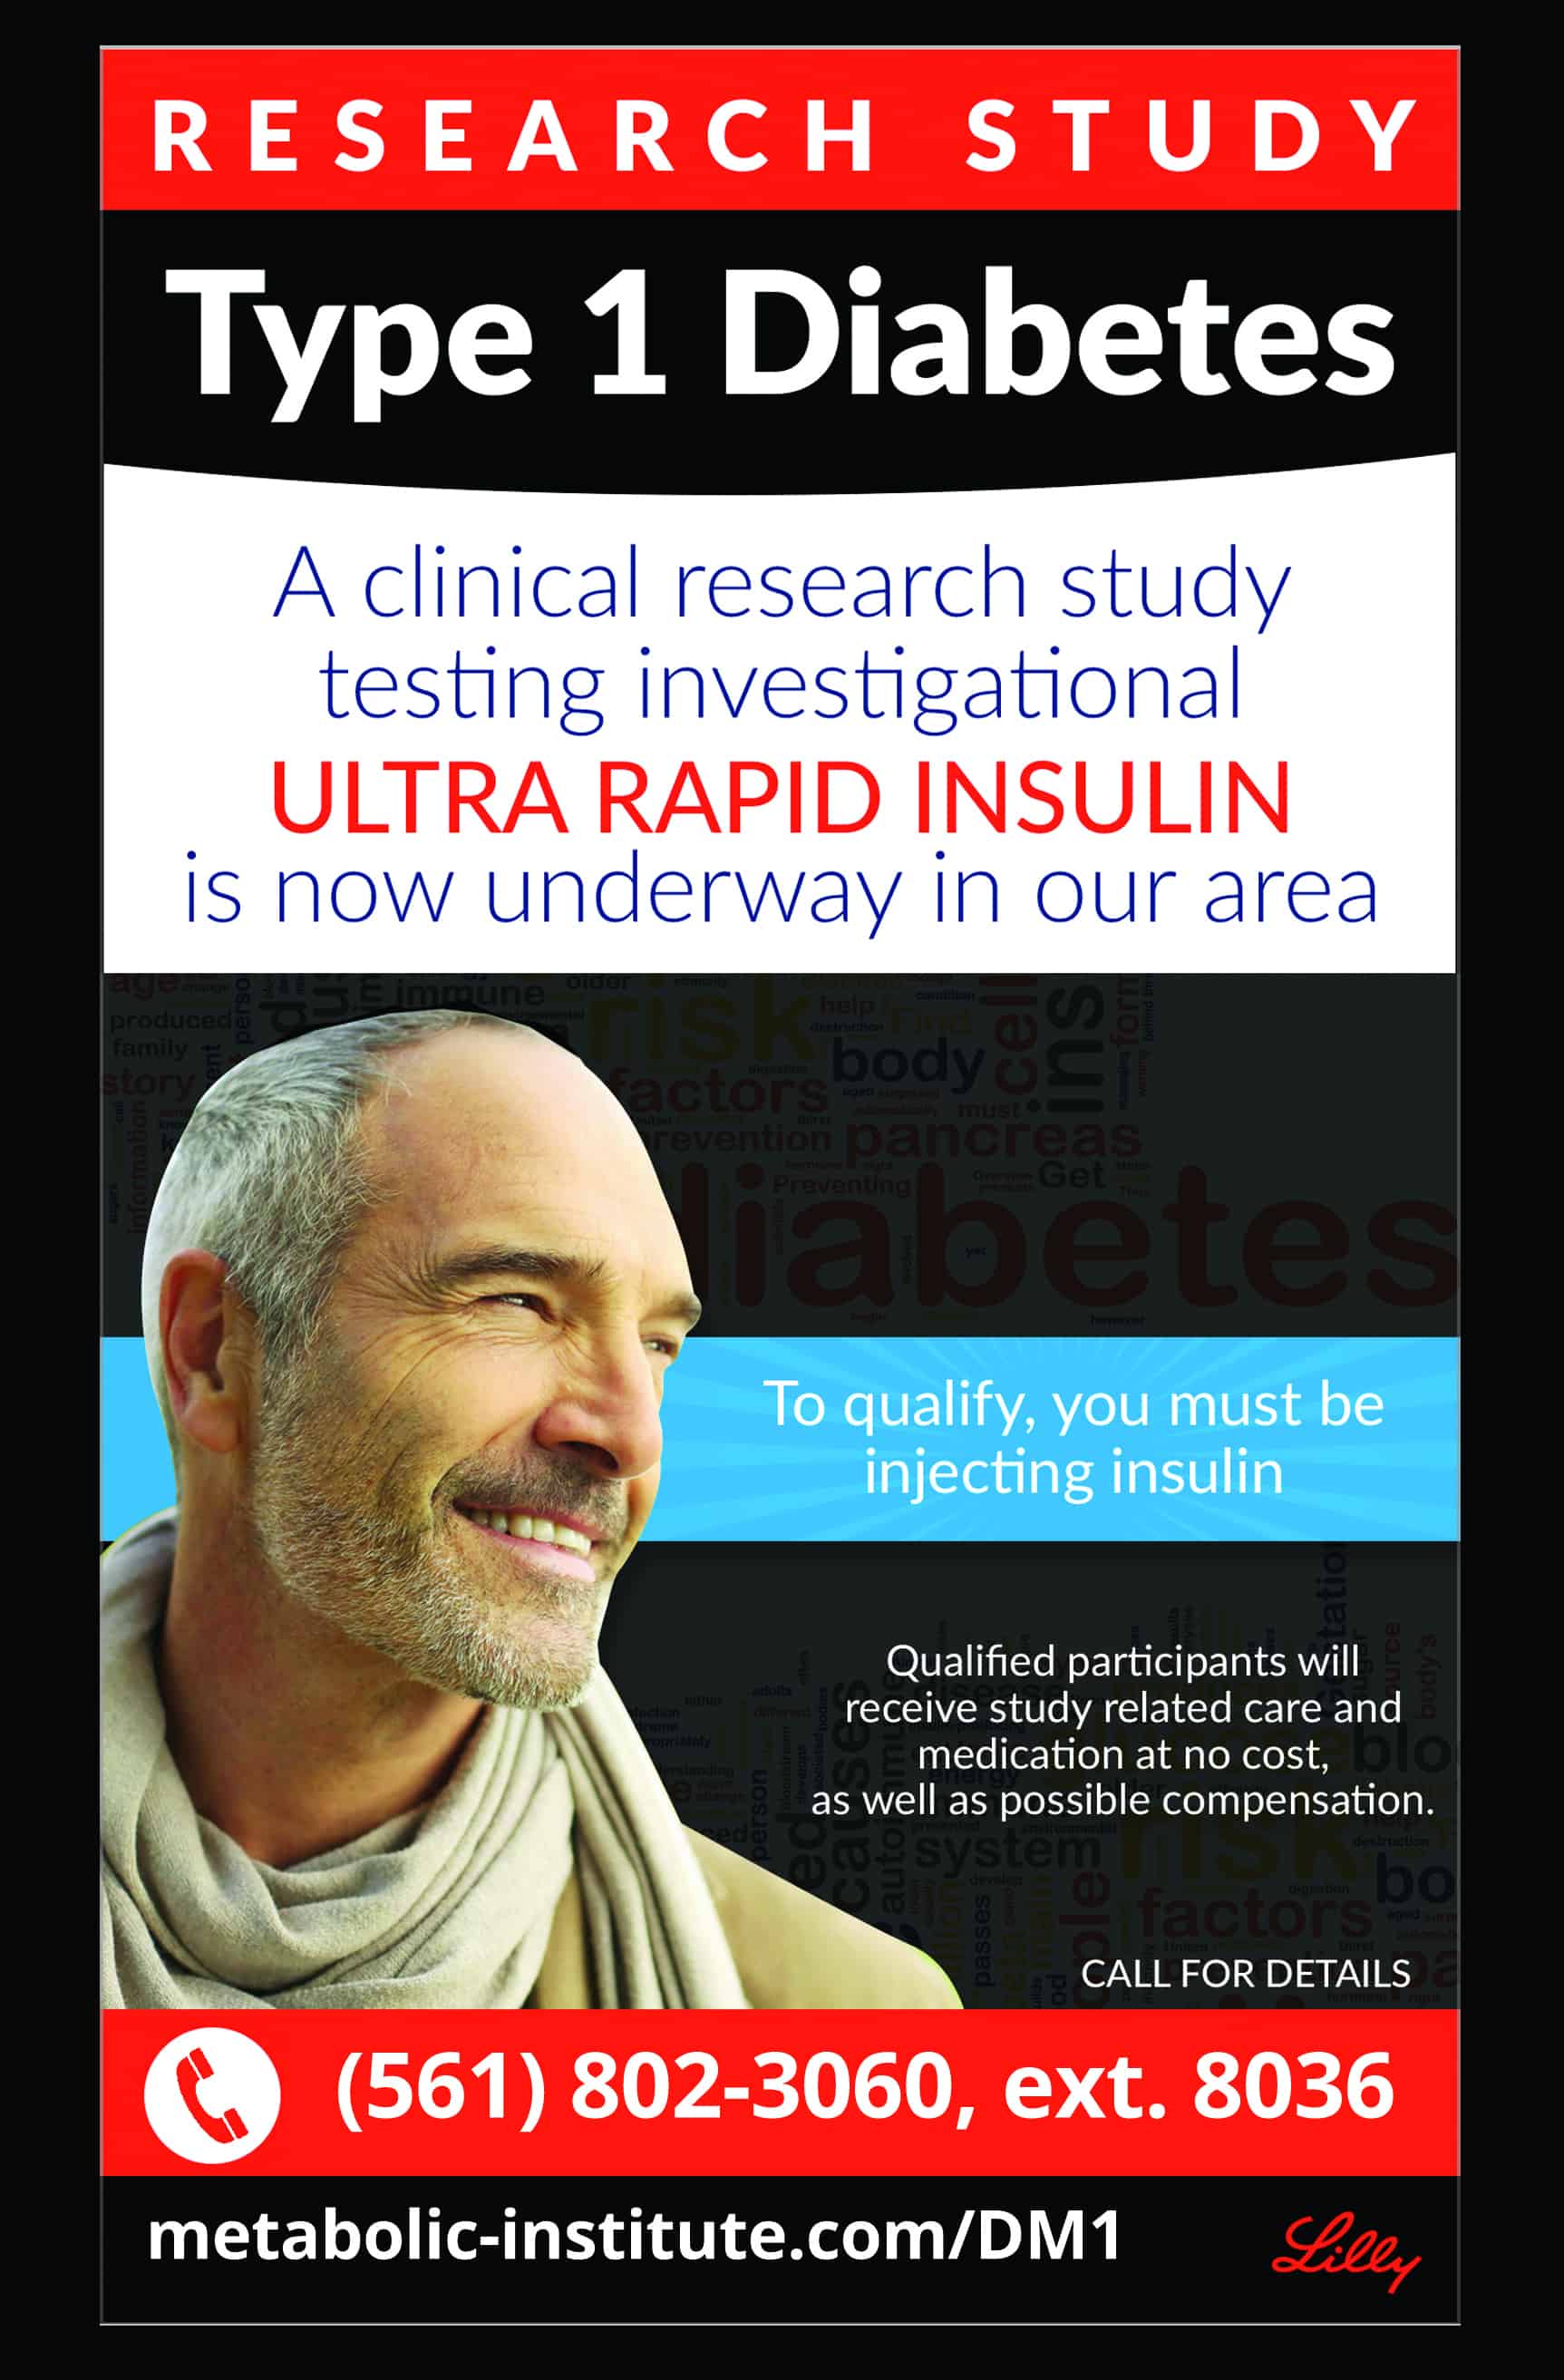 Metabolic Research Institute in West Palm Beach Florida is conducting a Type 1 Diabetes on Insulin clinical research trial for people with Type 1 Diabetes testing an investigation ultra rapid insulin.